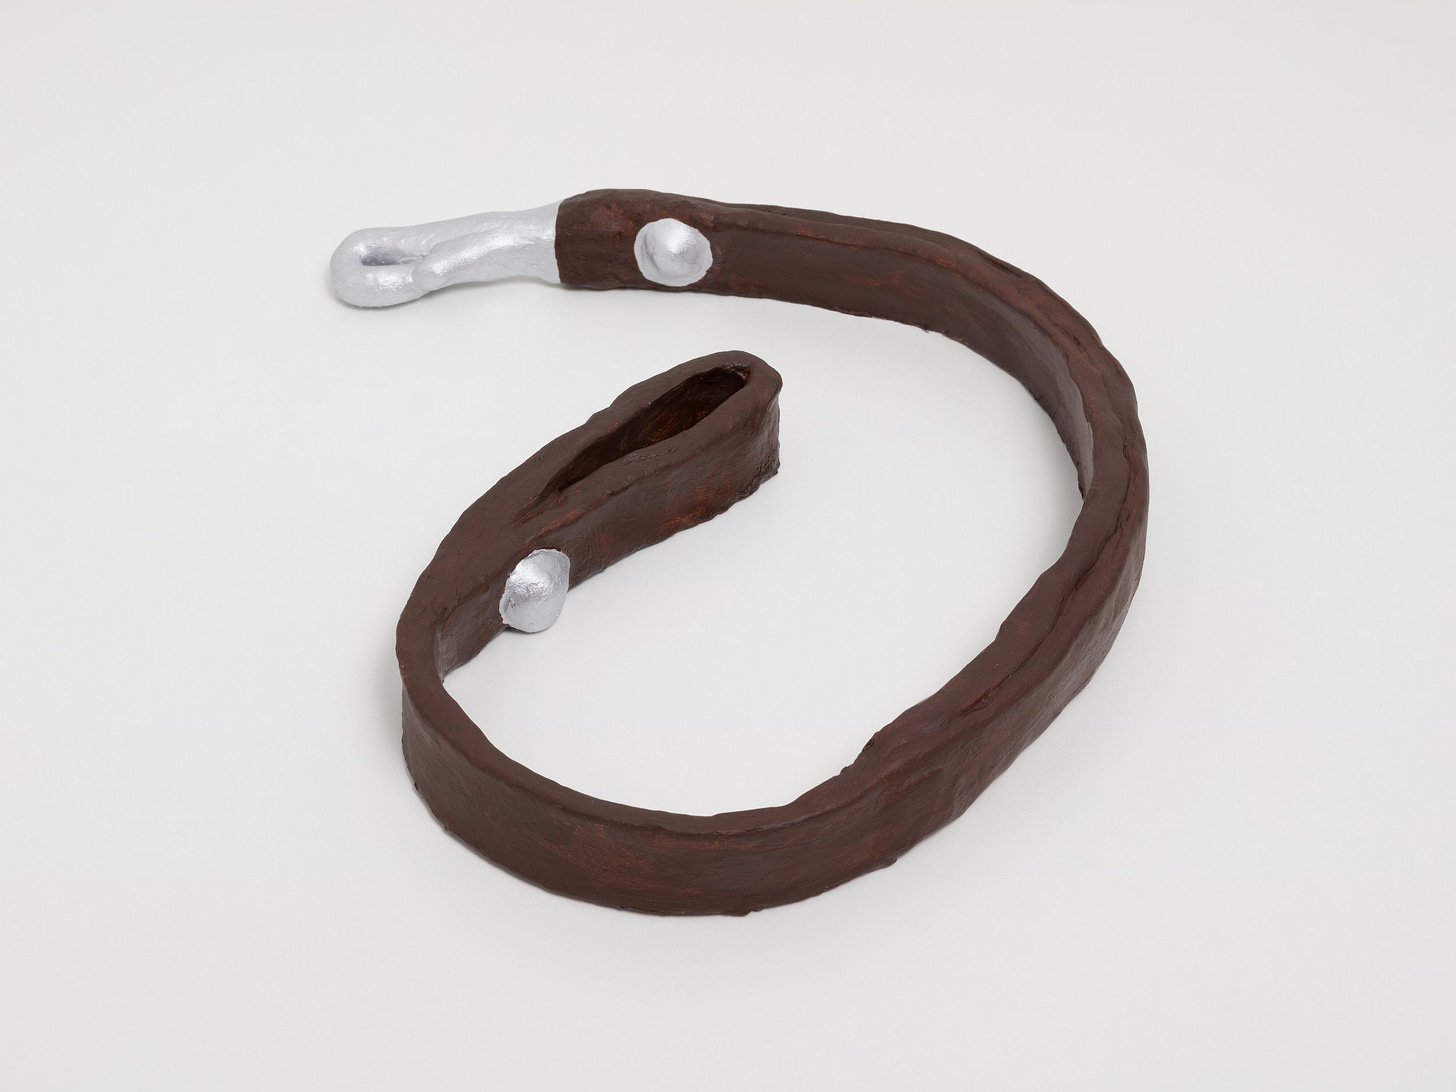 Emilie Louise Gossiaux's Leash (2022) is a circular ceramic dog leash with brown and silver oil paint.